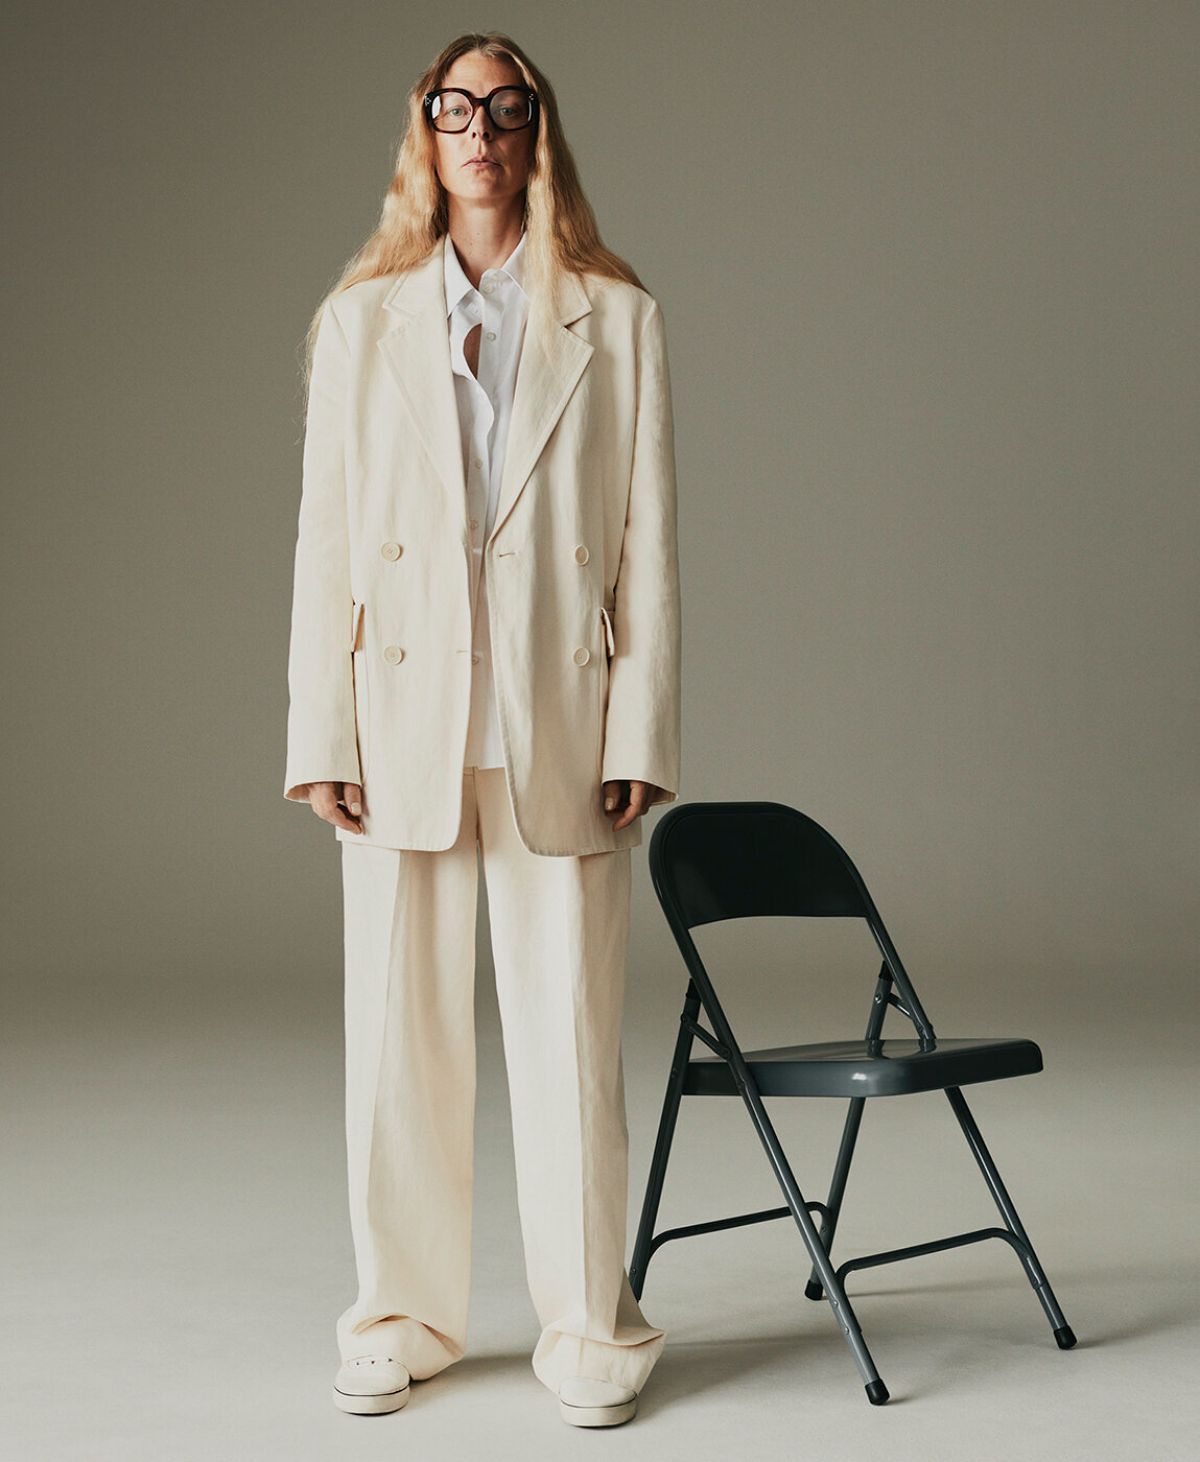 Clothing & Accessories: The Row White Tihana cotton-blend gabardine blazer / The Row Igor double-pleat cotton-blend wide-leg trousers / The Row Carla long-sleeved chiffon shirt / Re/Done White 70s canvas trainers / Celine Eyewear Brown Square tortoiseshell-acetate glasses Hybrid Dressing: Laura Morgan by Sarah Piantadosi for Matches Fashion Fall-Winter 2021 Ad Campaign